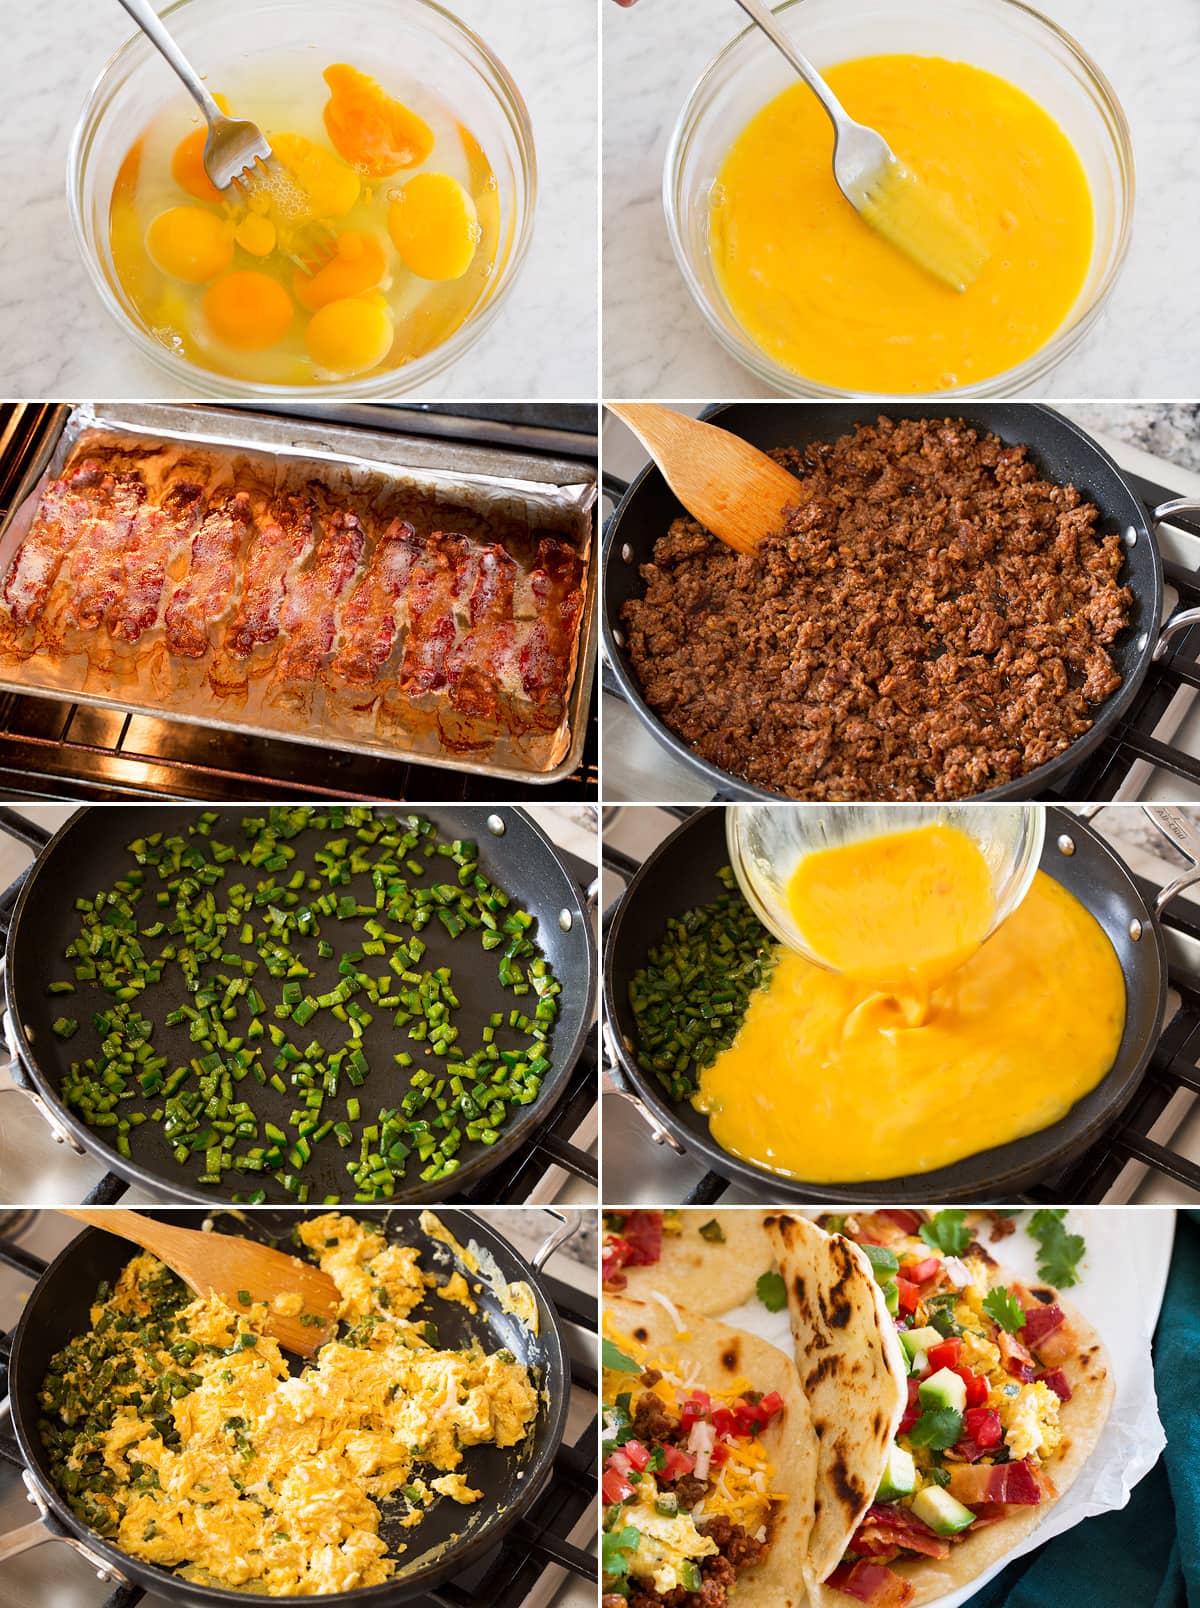 Eight photos showing steps of making breakfast tacos.